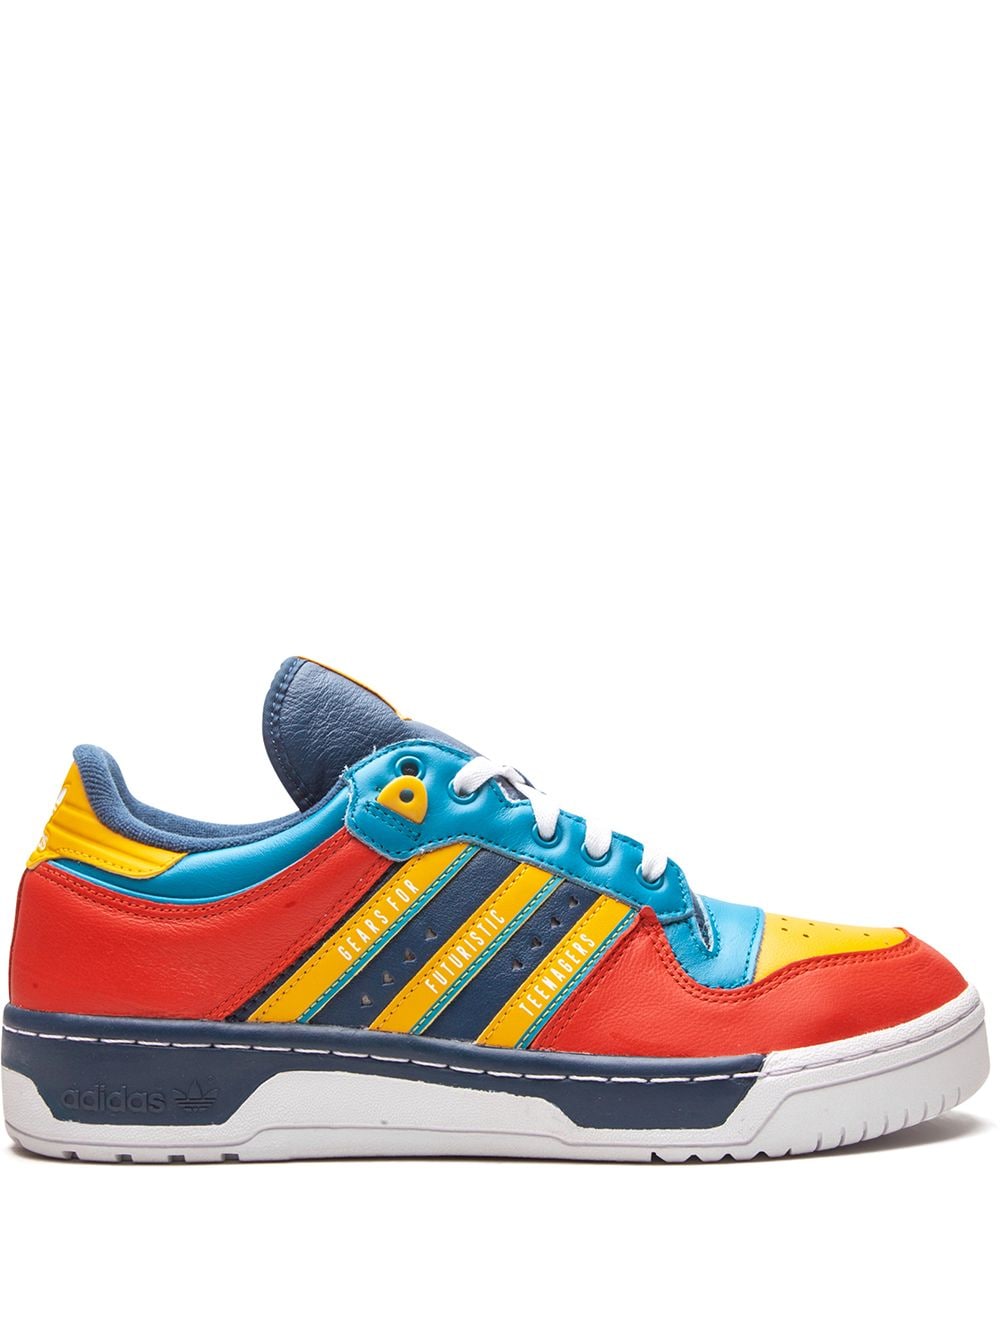 adidas x Human Made Rivalry Low sneakers - Blue von adidas